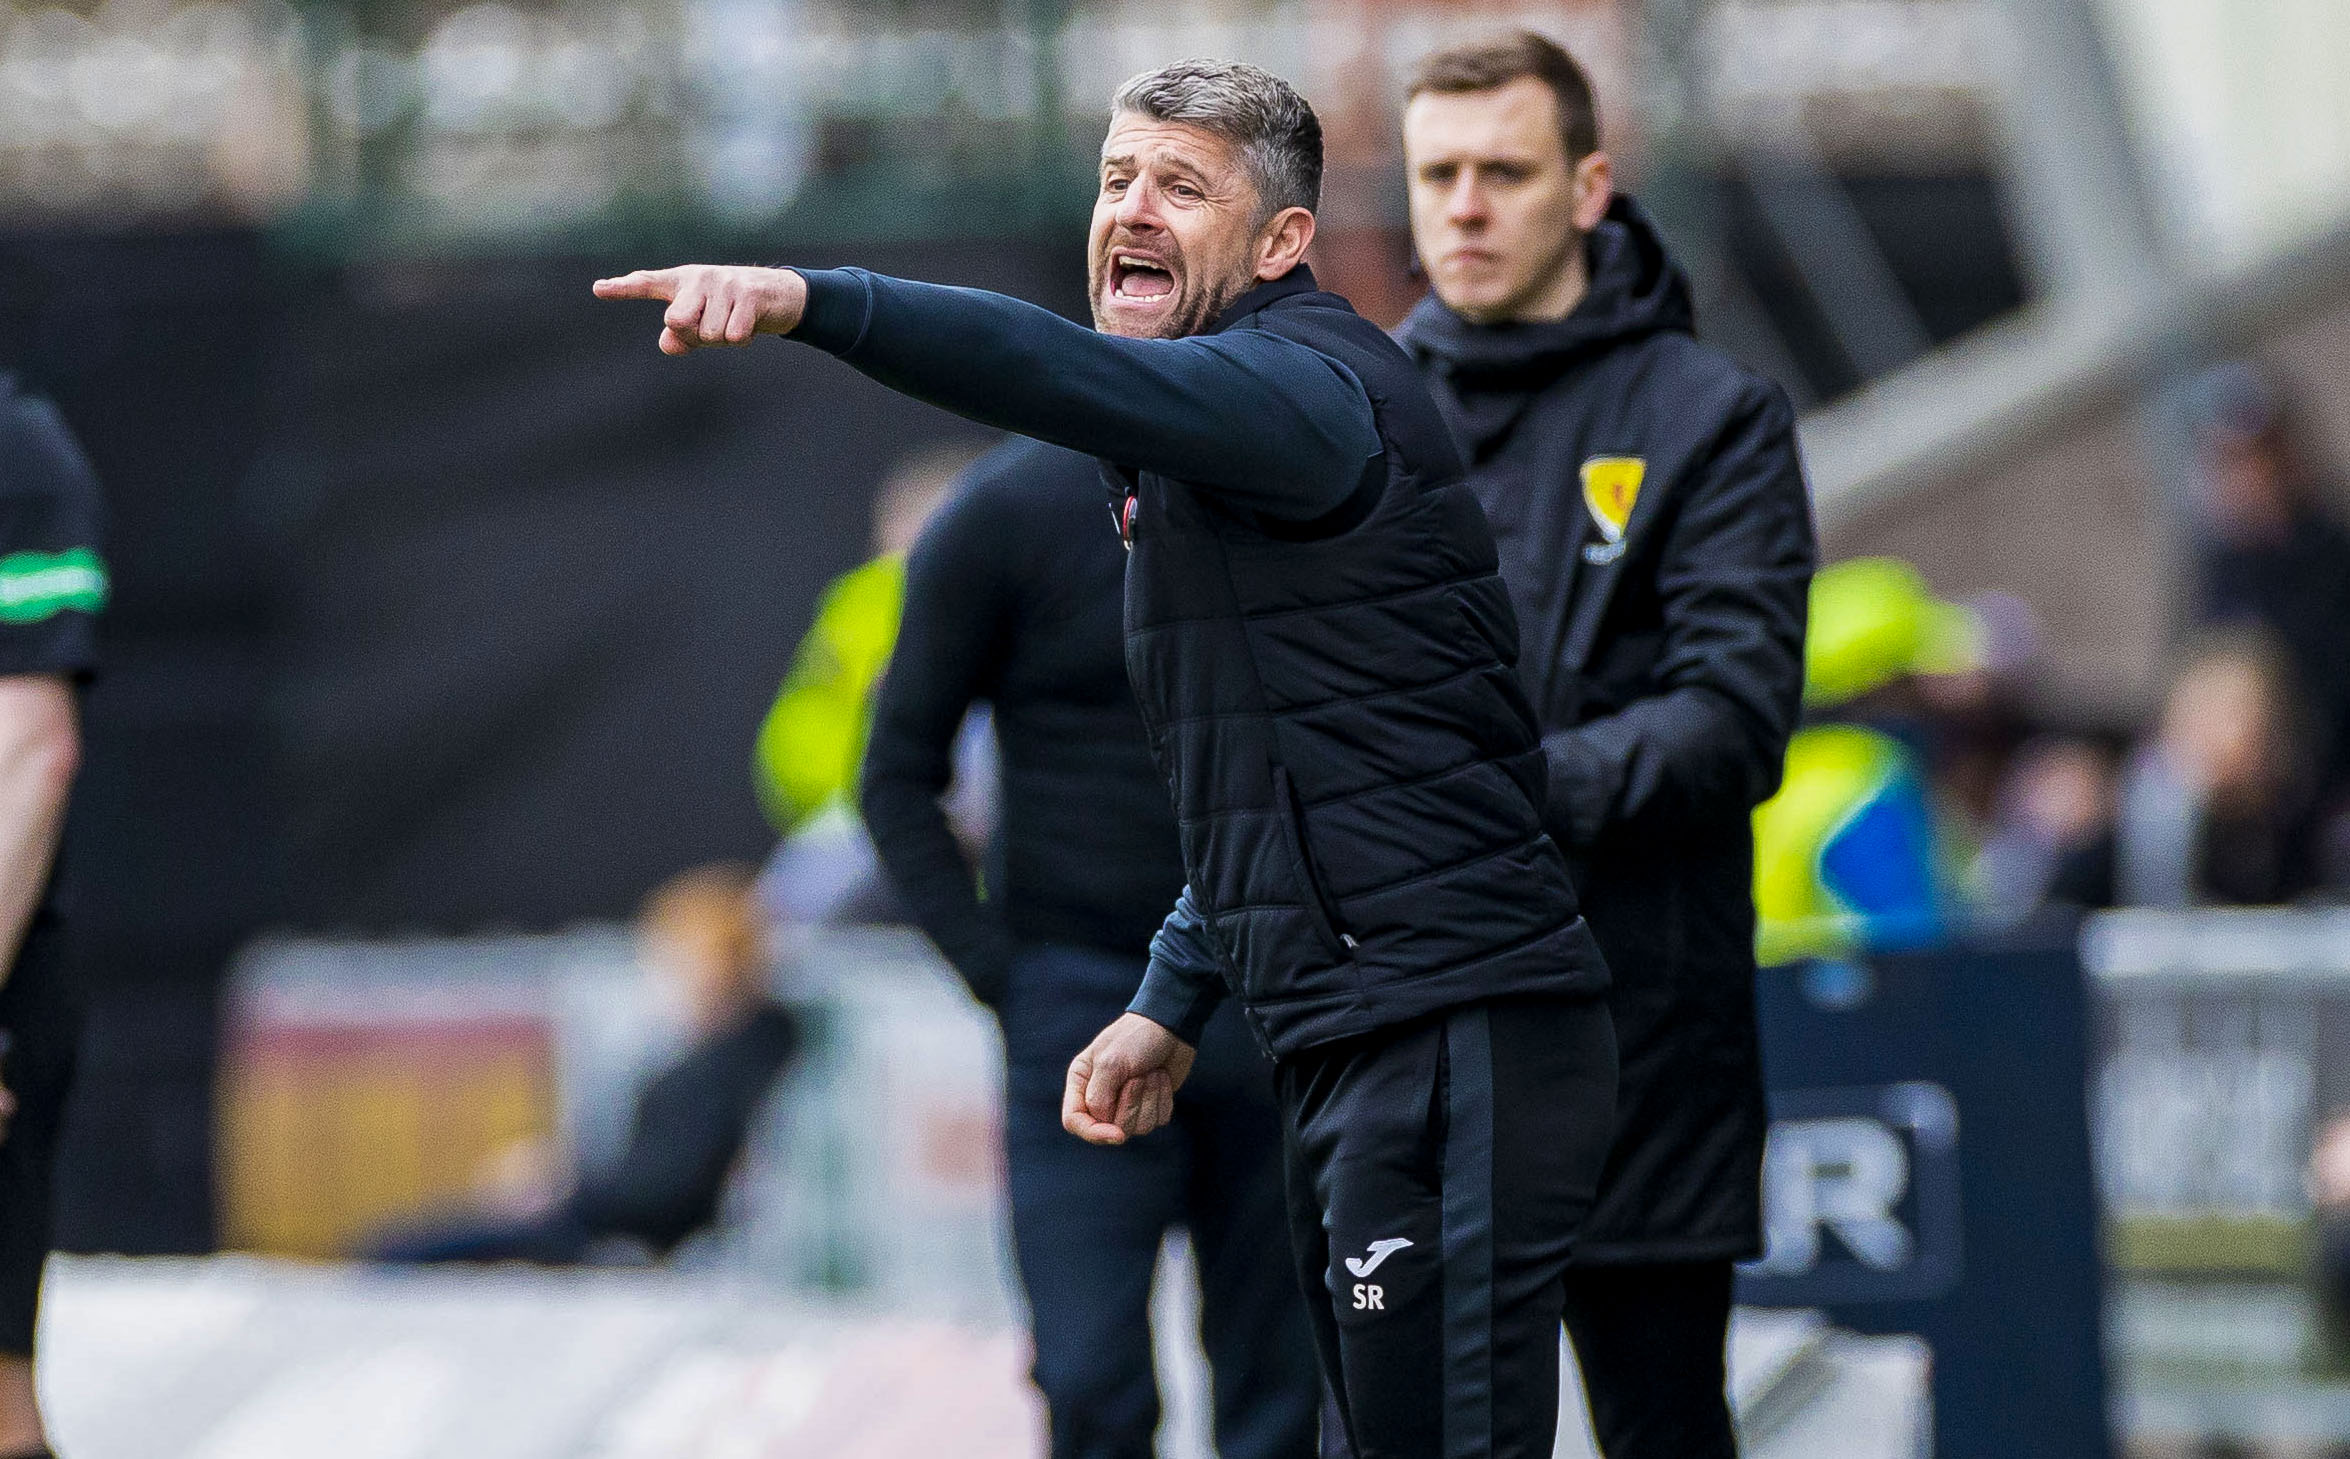 Stephen Robinson urges St Mirren not to relent in race for top six